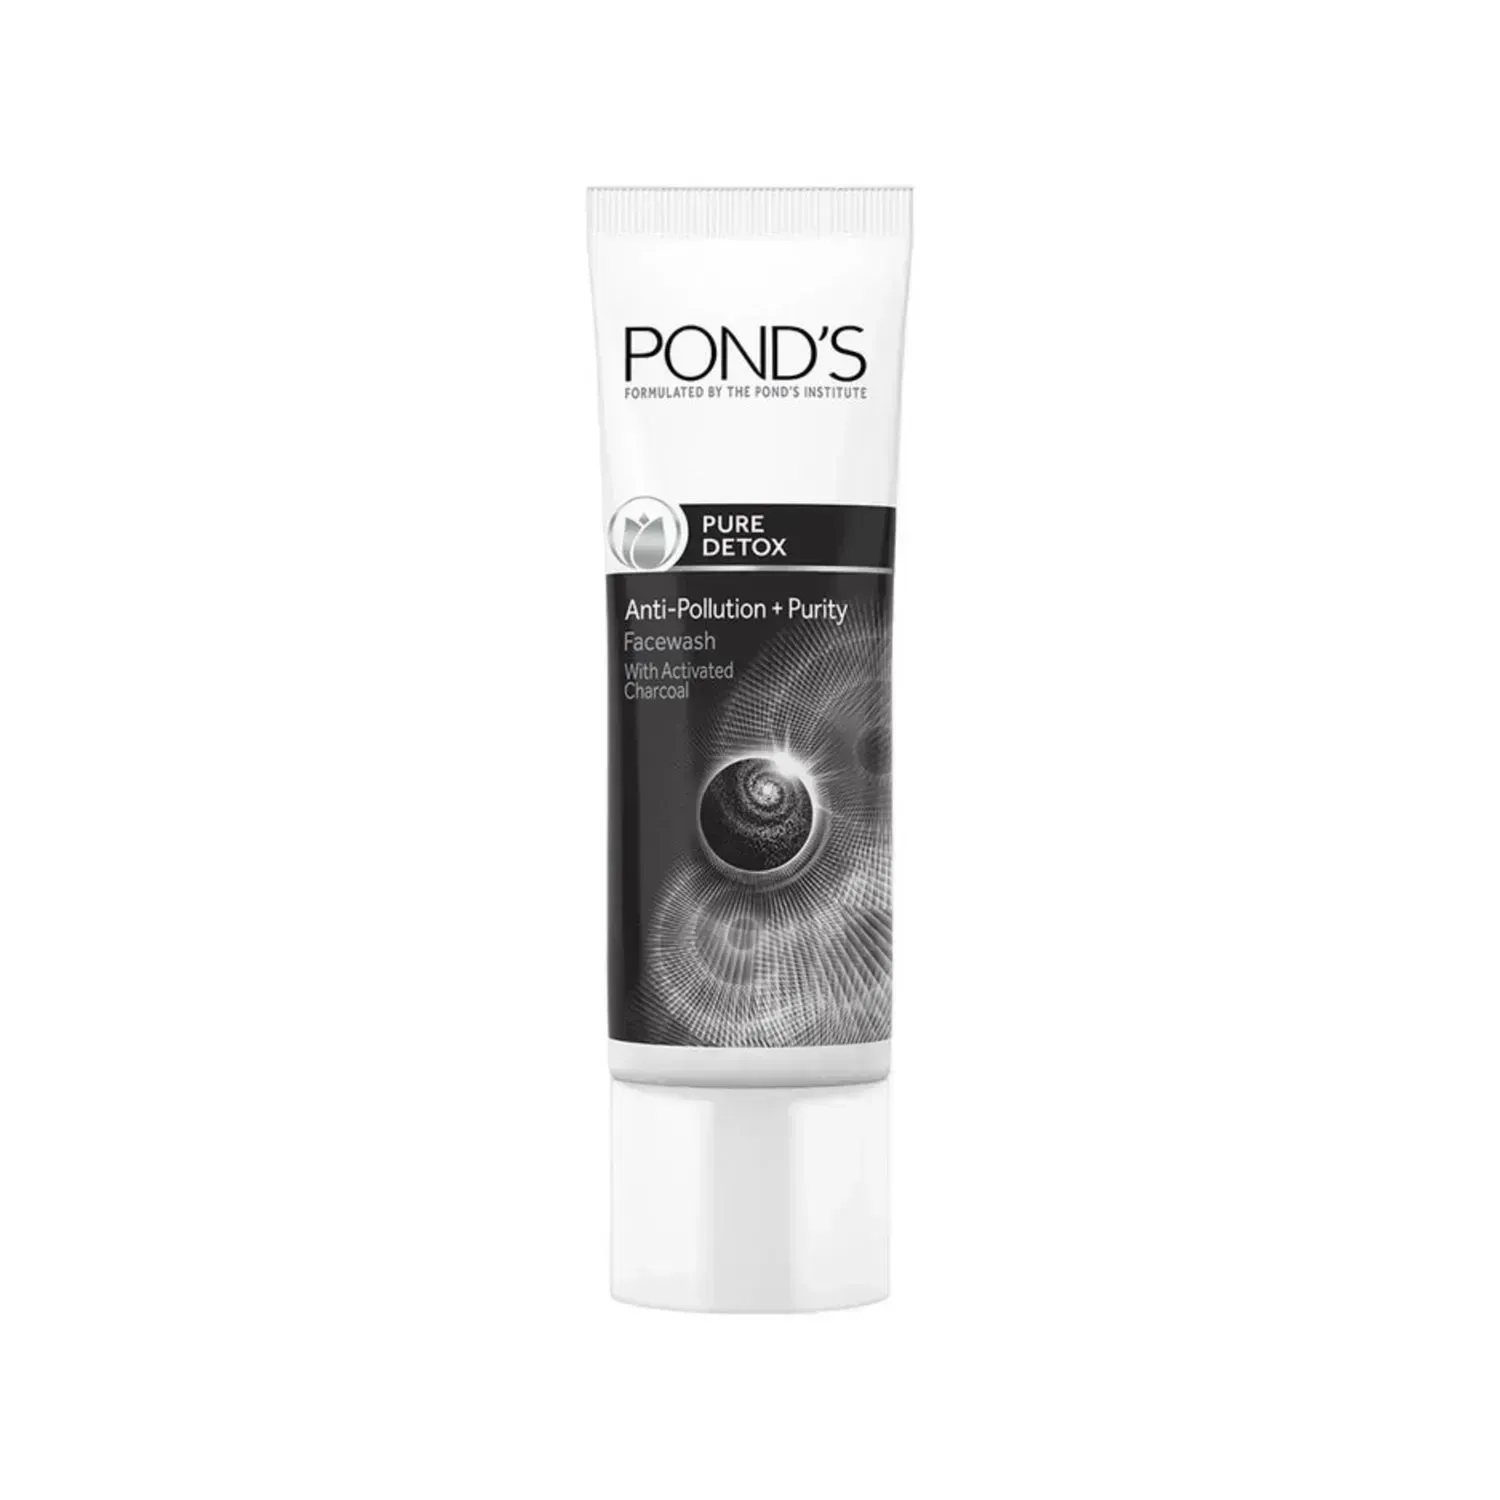 Pond's | Pond's Pure Detox Anti-Pollution Purity Face Wash With Activated Charcoal - (15g)